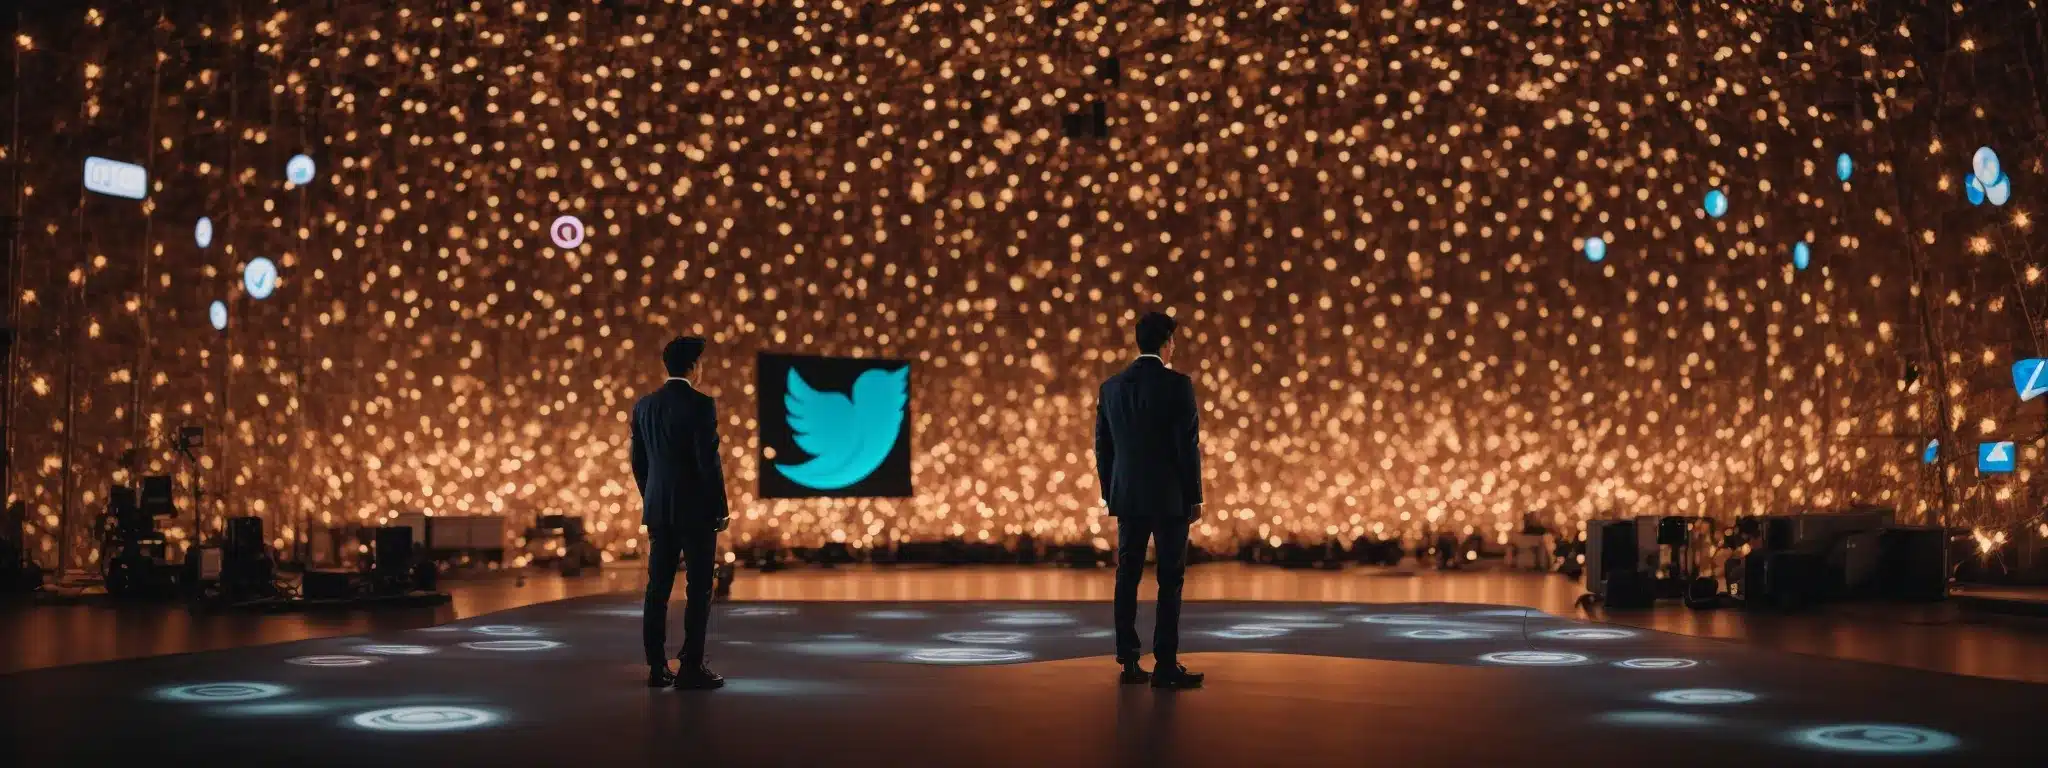 An Illuminated Stage With A Single Figure Standing At The Center, Surrounded By Floating, Glowing Icons Of Various Social Media Platforms.